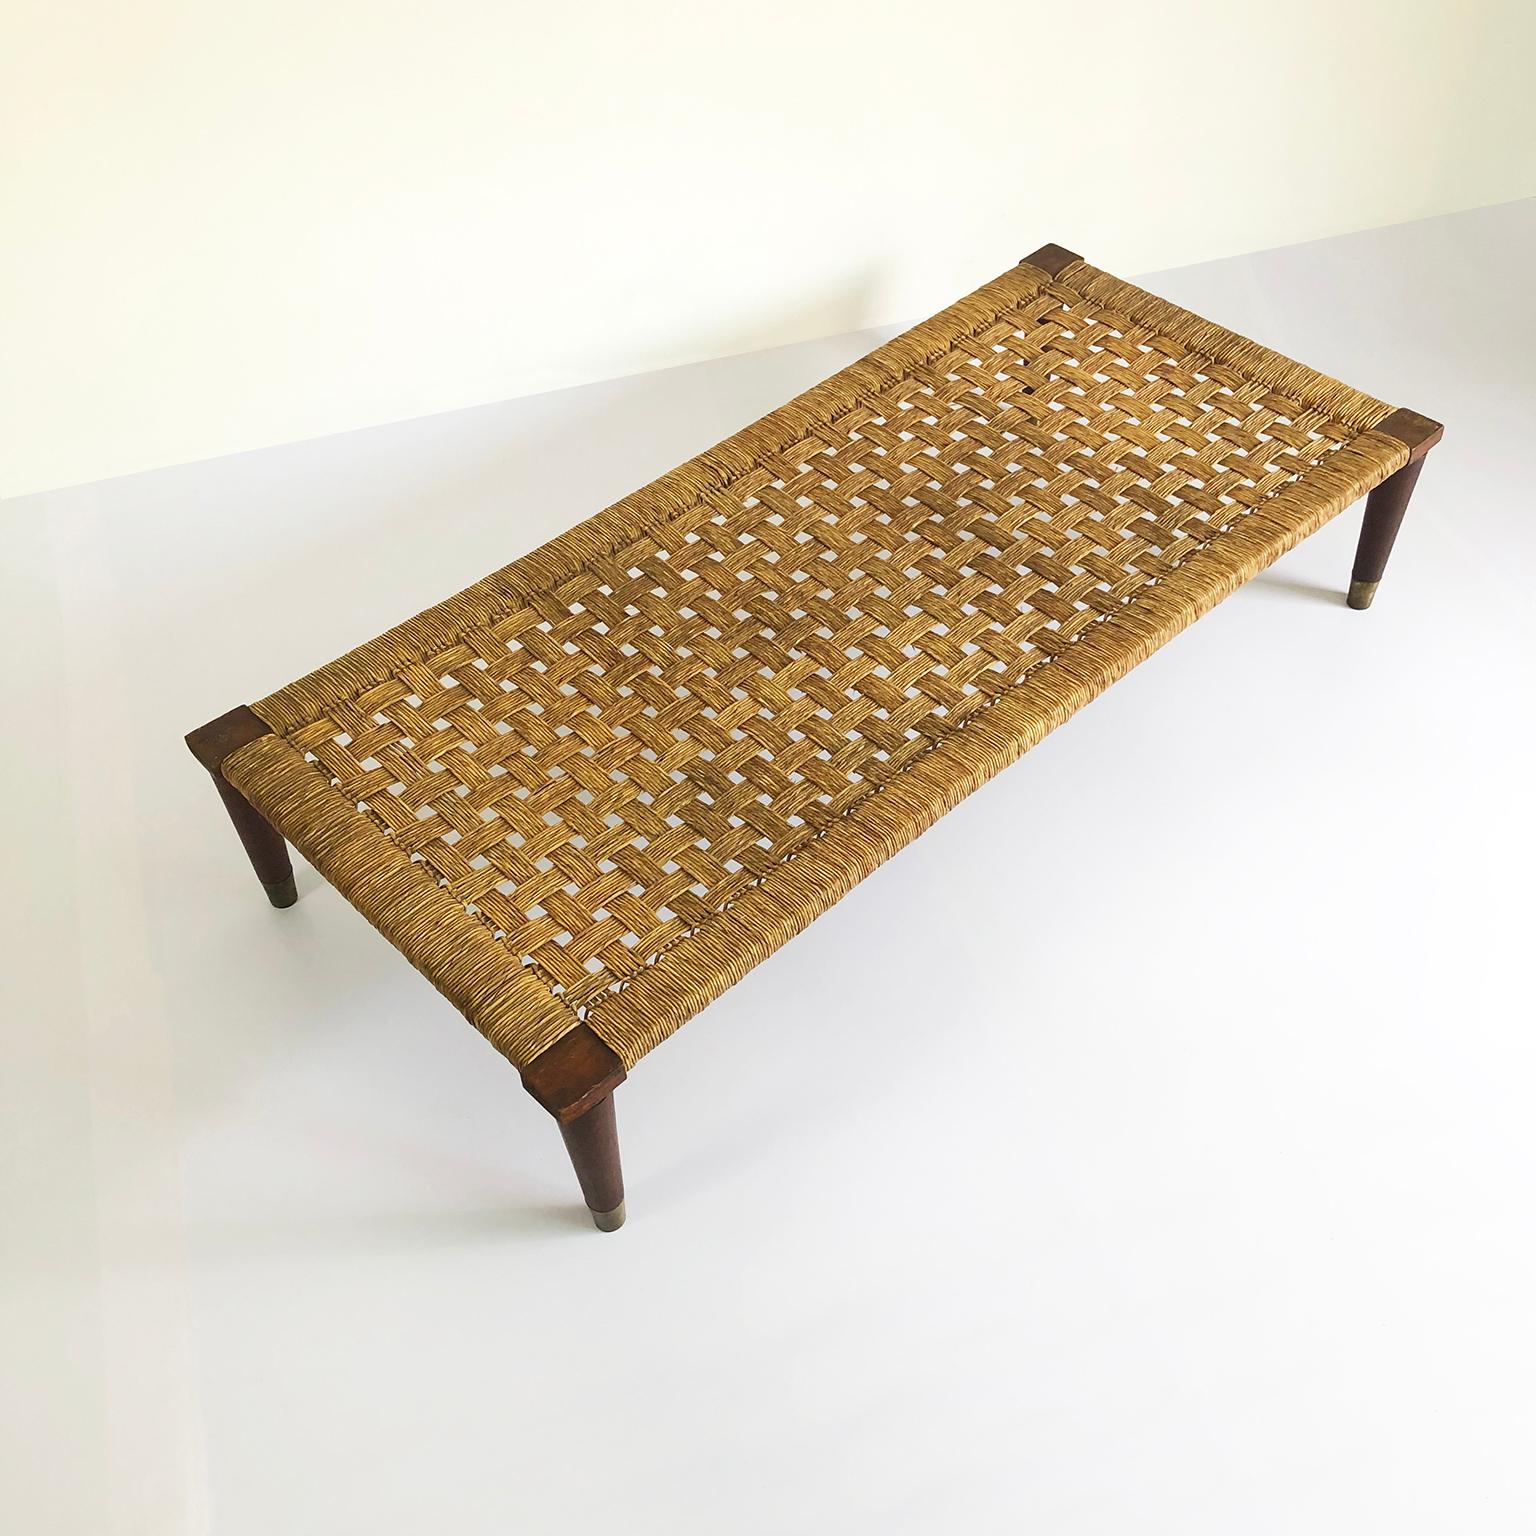 We offer this rare coffee table by Michael Van Beuren. This rare table combines details the Domus line early work and Danish line structure, made in mahogany wood, brass, palm cords and removable legs.